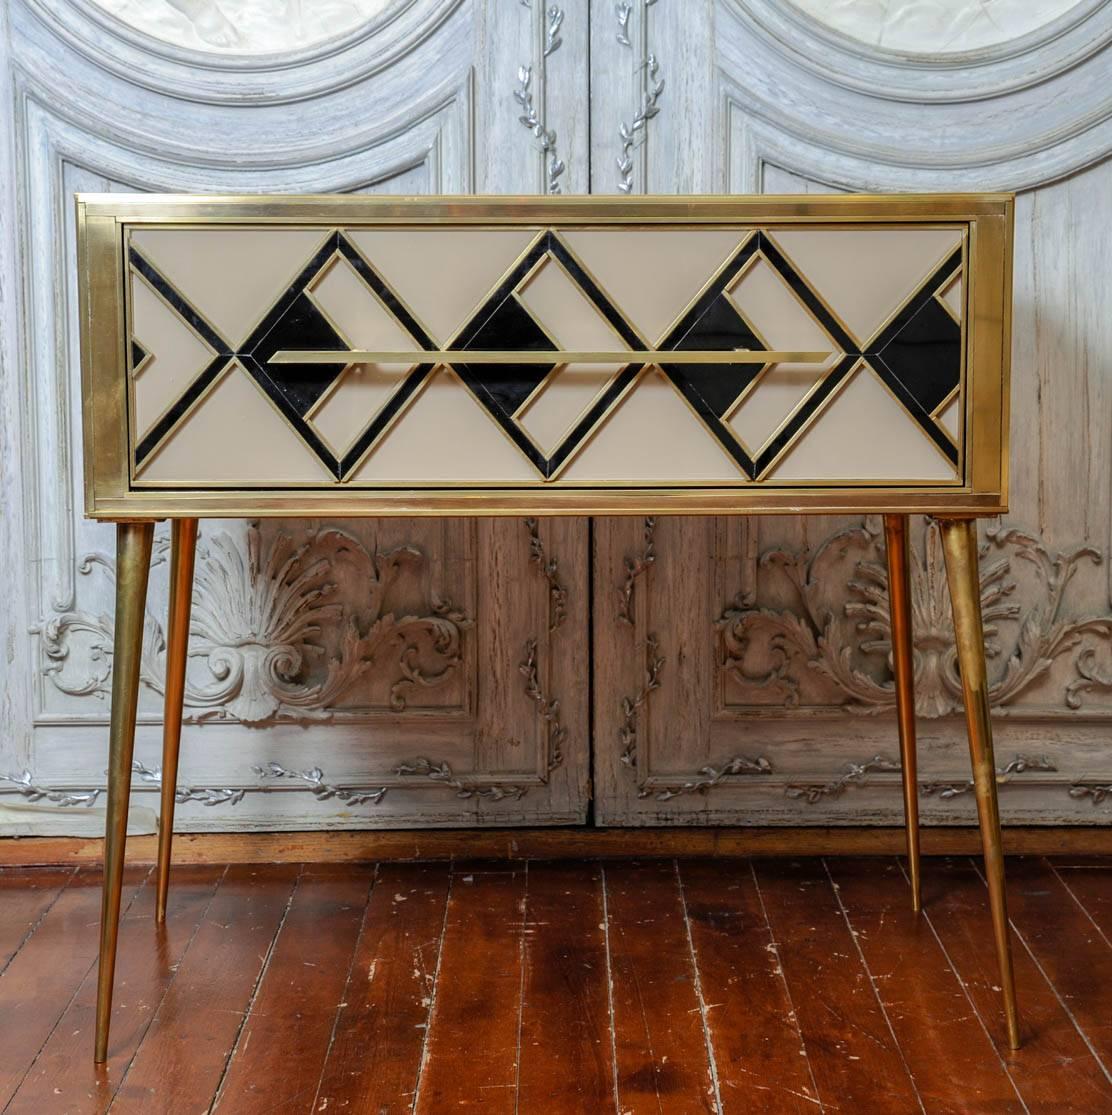 Pair of vintage commodes, ivory and black mirrors, Murano glass sculpted geometric shapes, fillet, feet and handle in brass. One drawer. Unique piece.